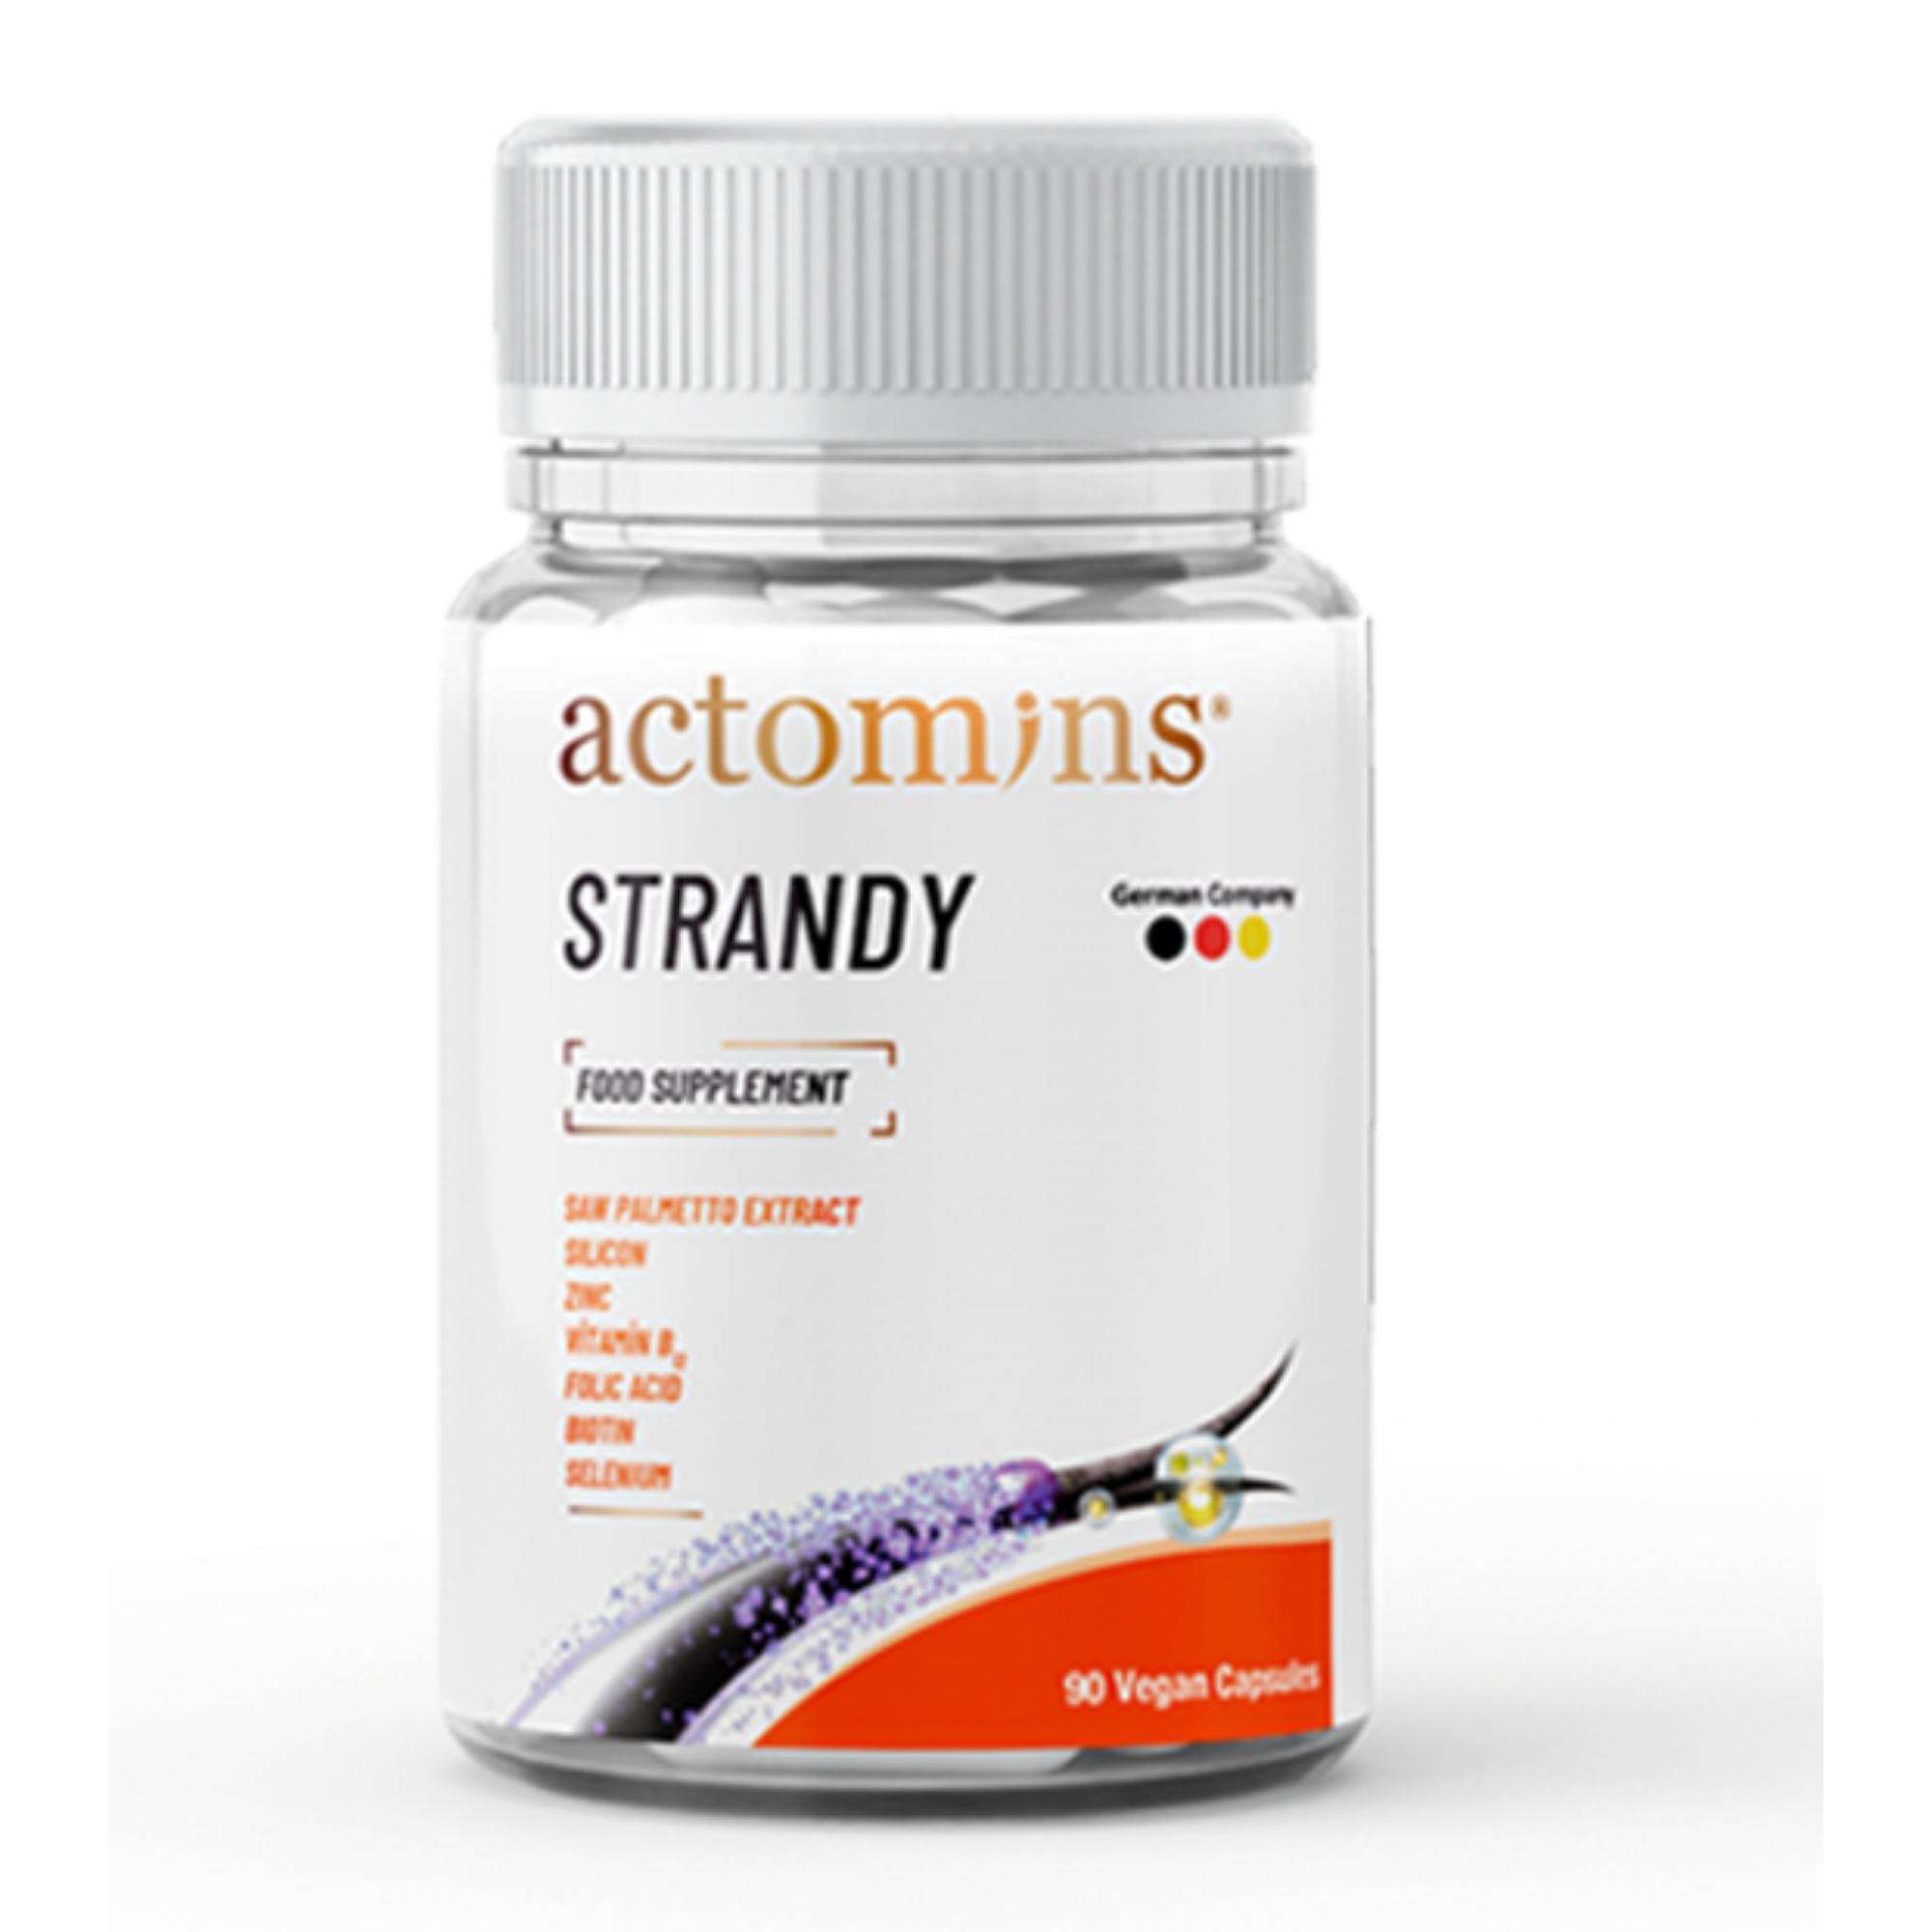 ACTOMINS Strandy